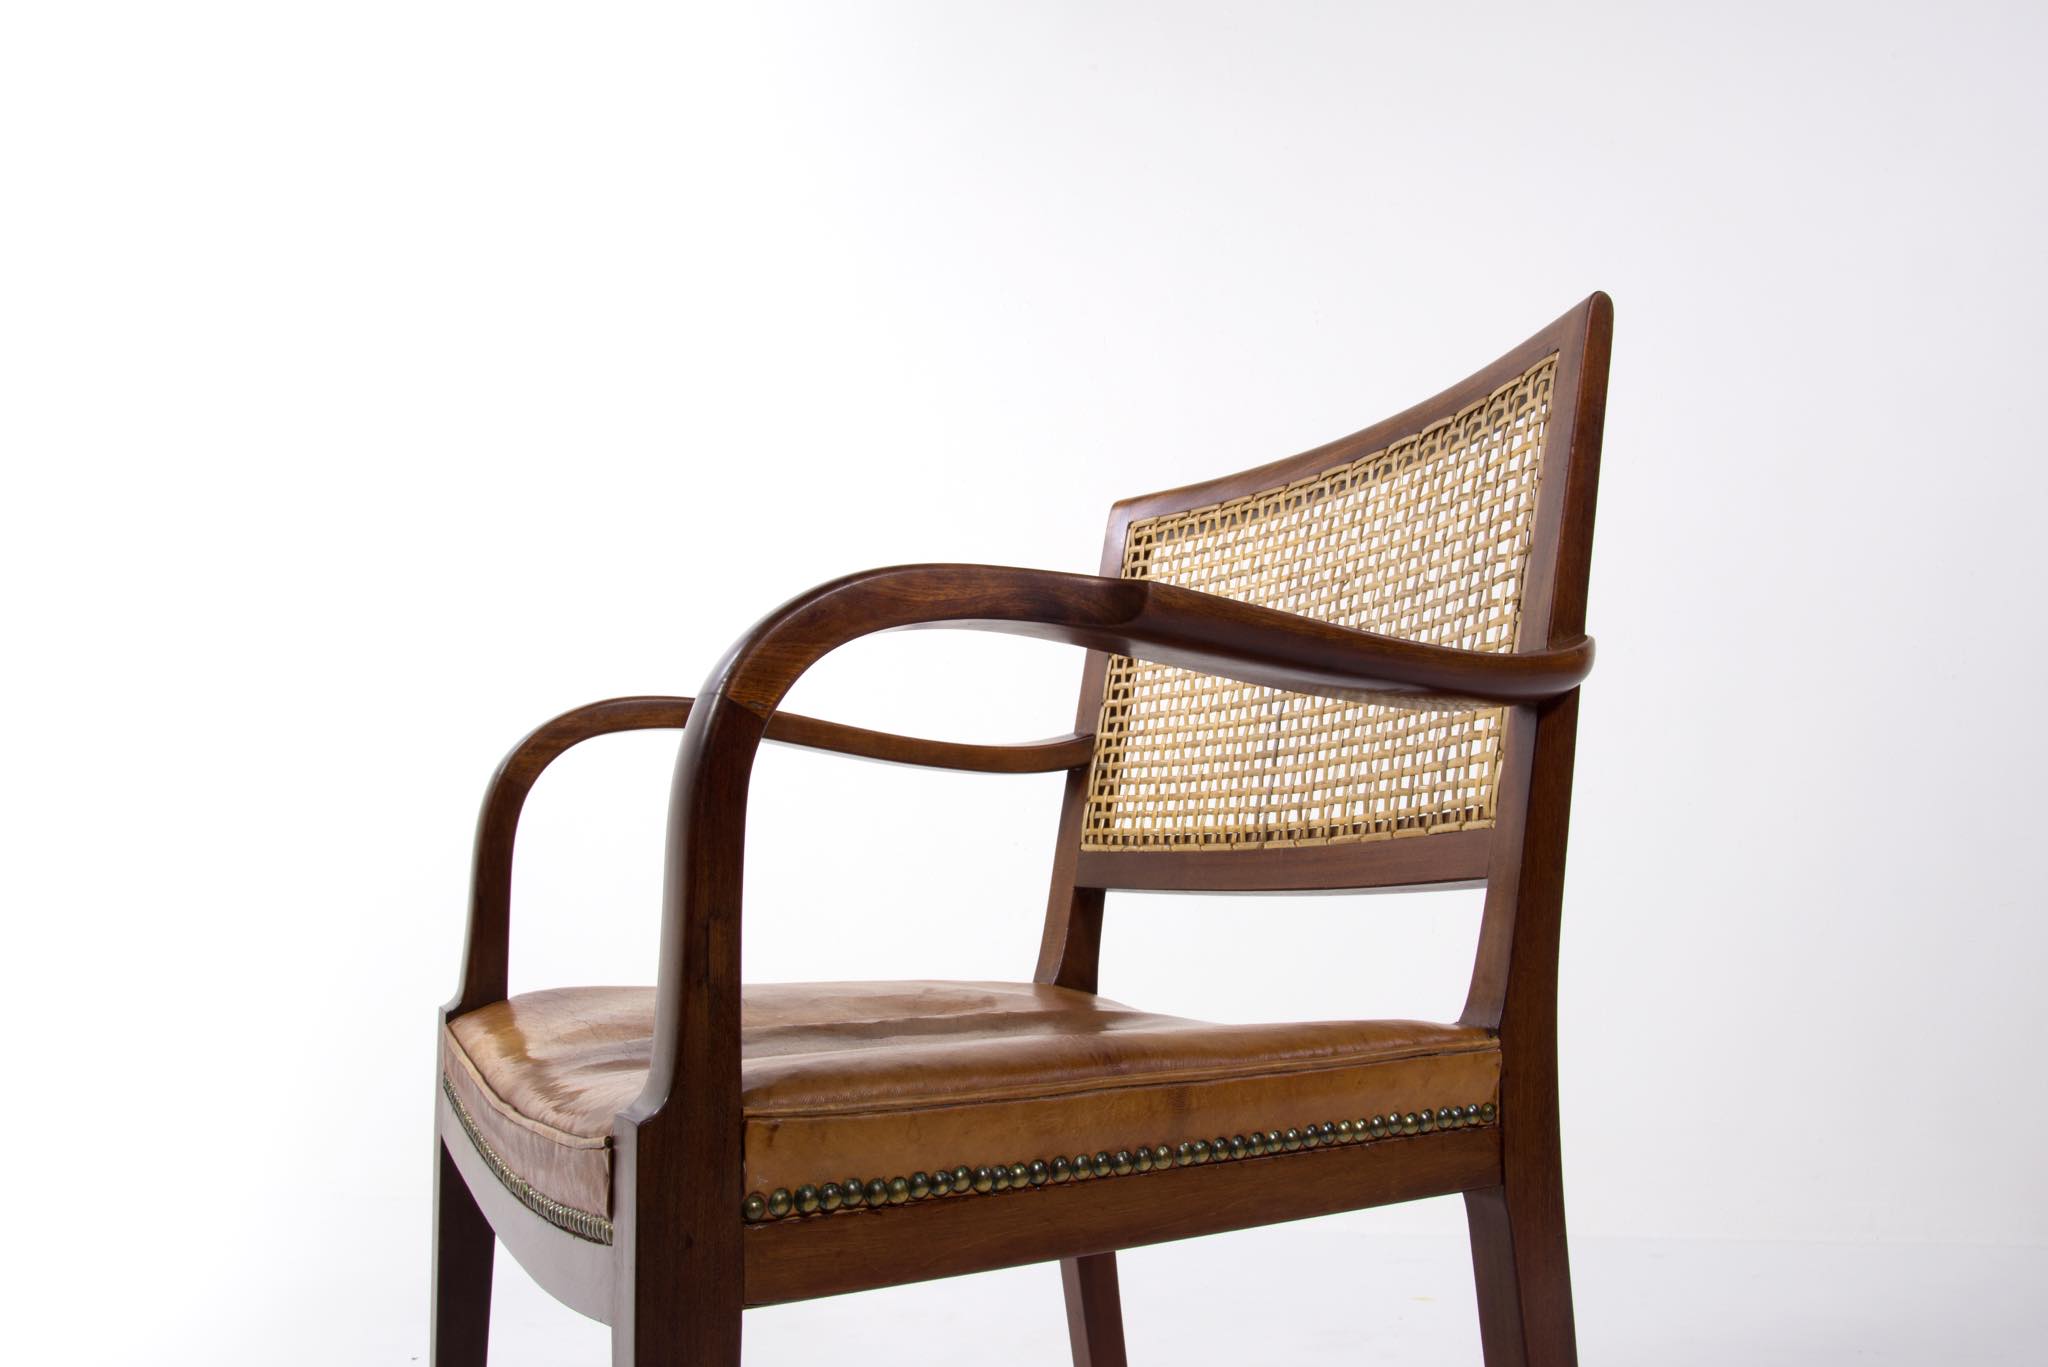 Frits Henningsen Study chair in Mahogany with original Niger 